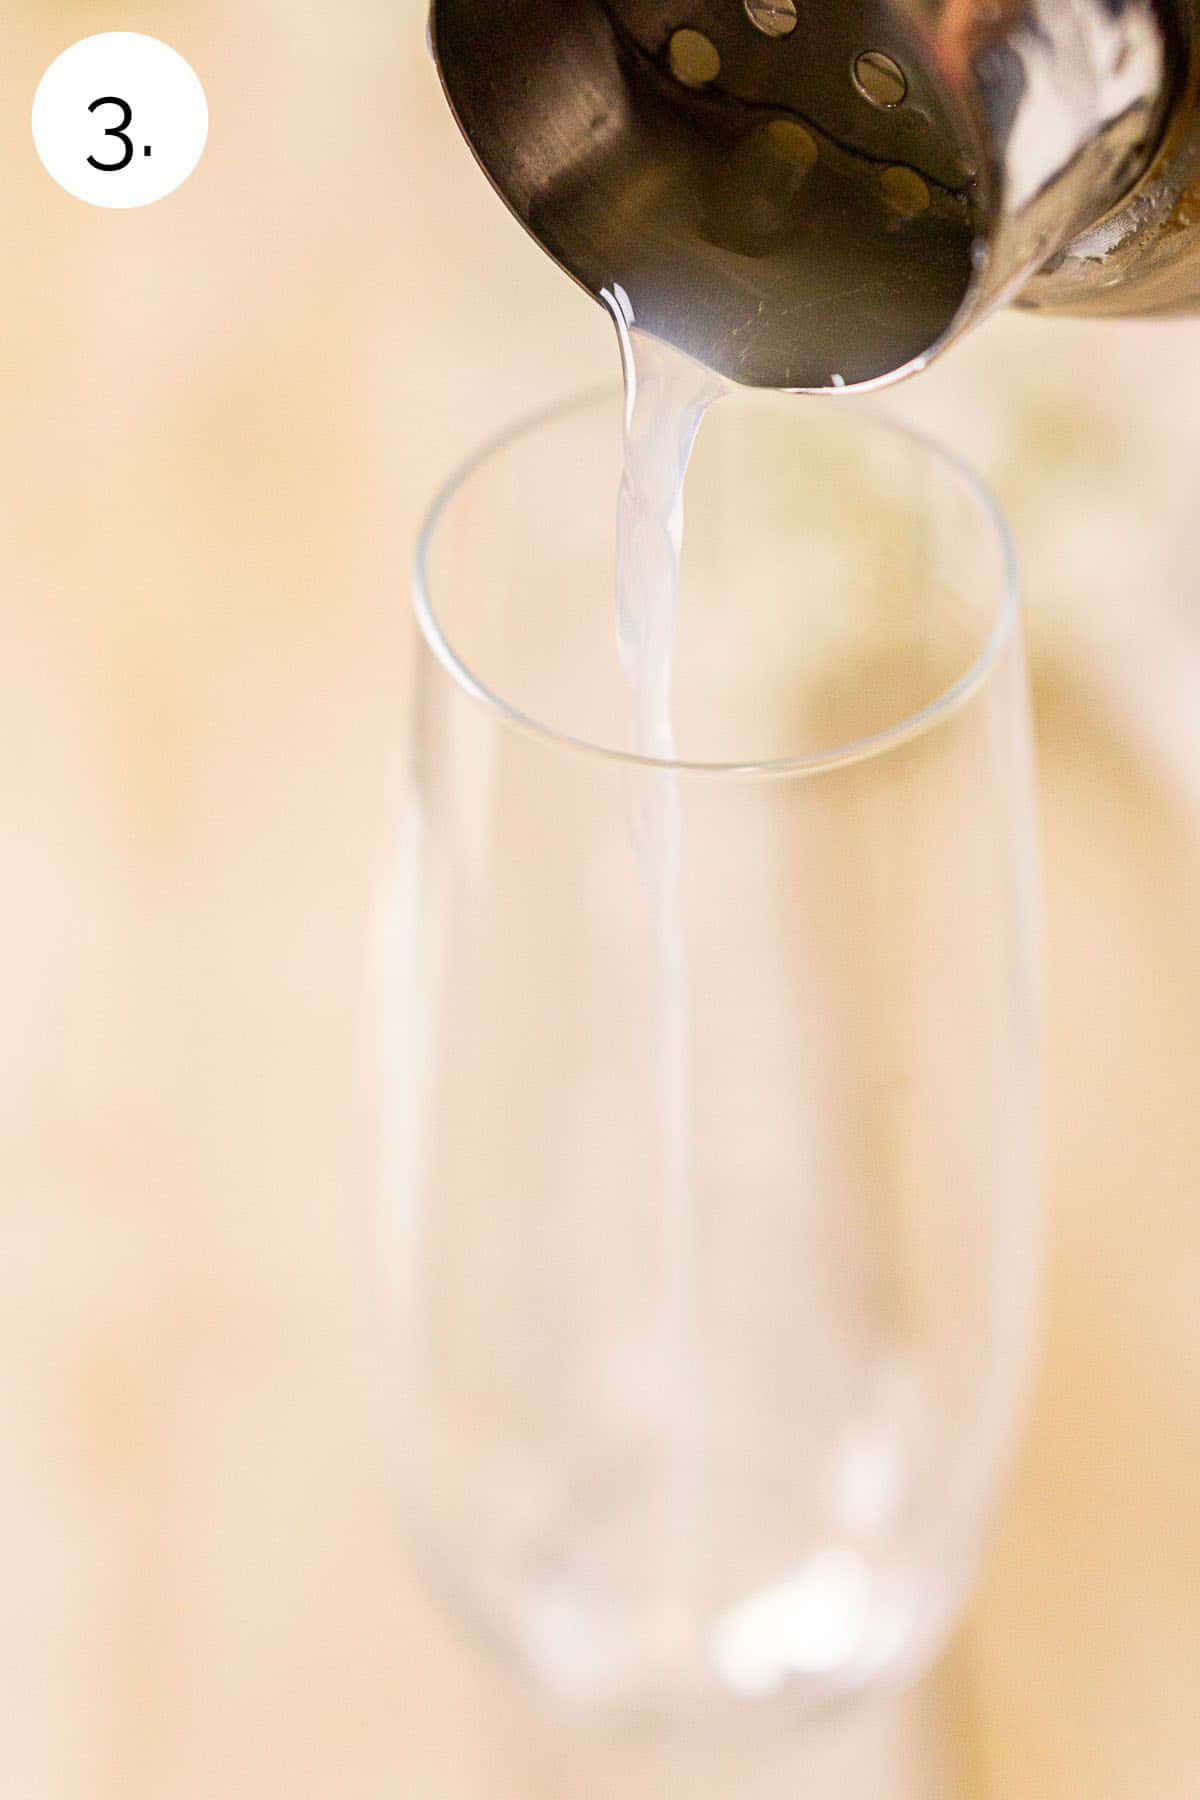 A cocktail shaker straining the lemon juice mixture into an empty Champagne flute on a wooden board.